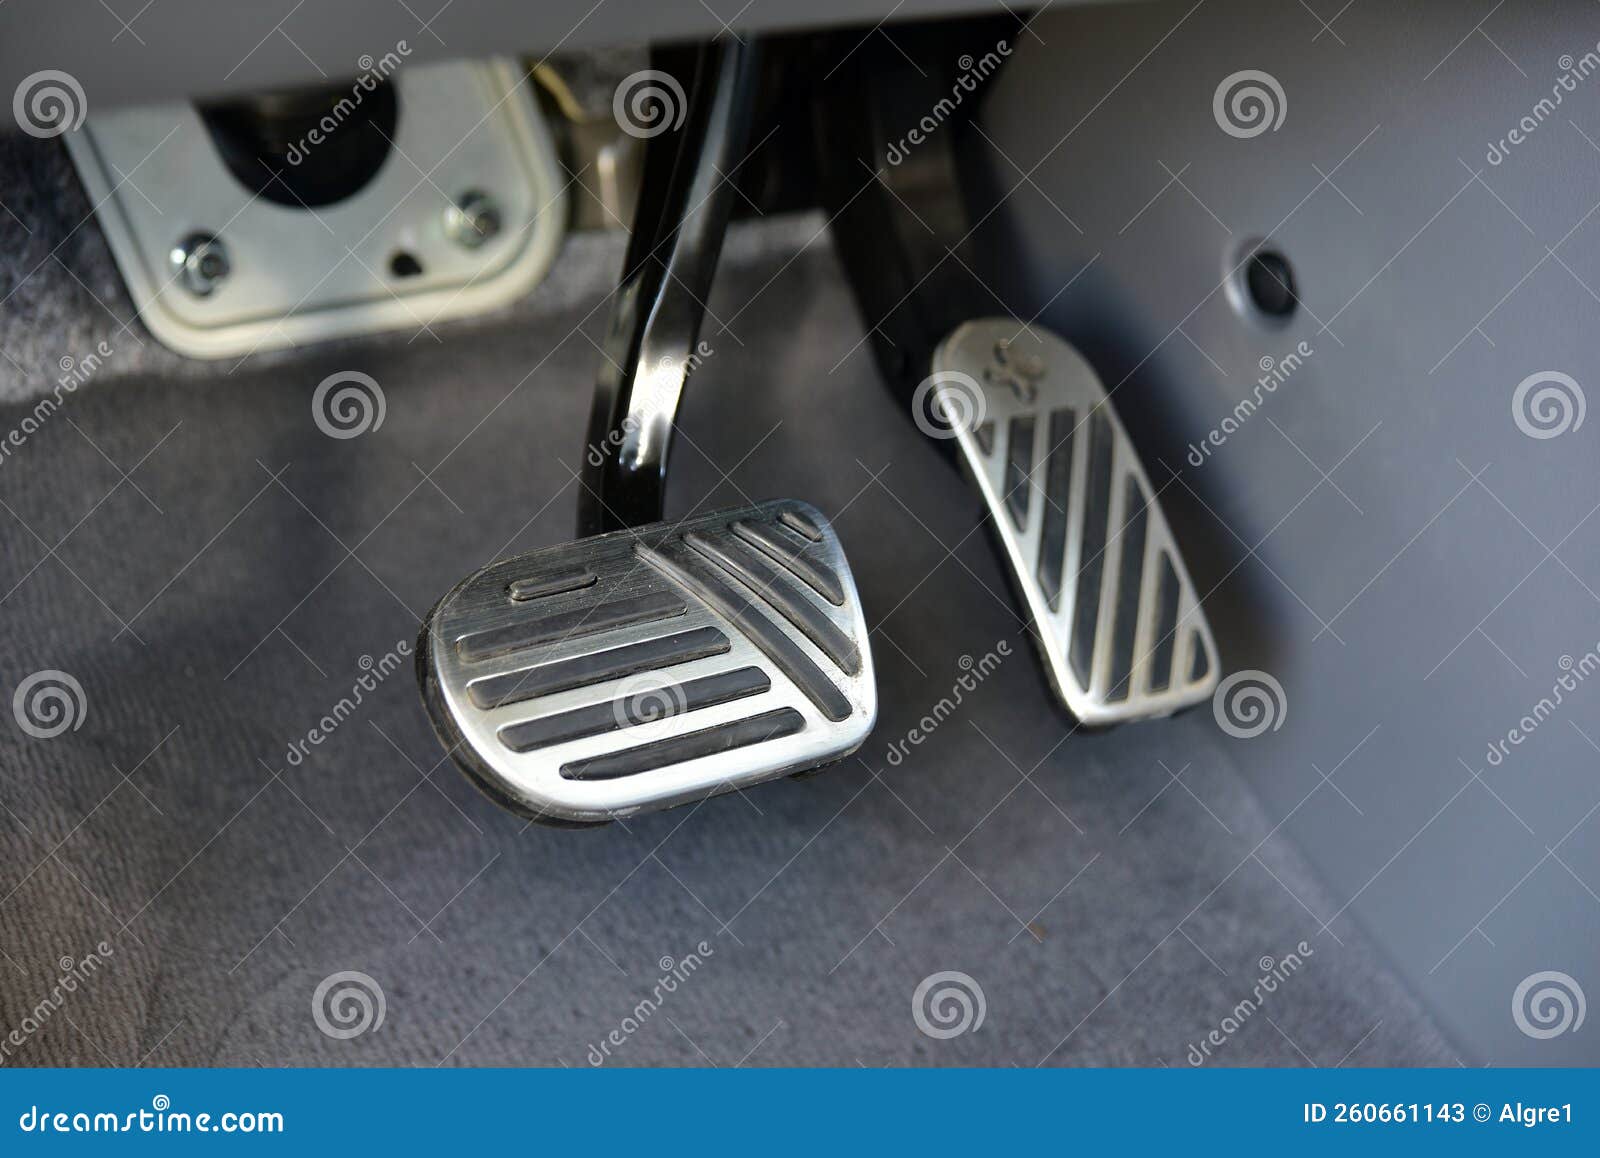 Car Brake Pedal and Accelerator Pedal Stock Image - Image of auto, fast:  260661143